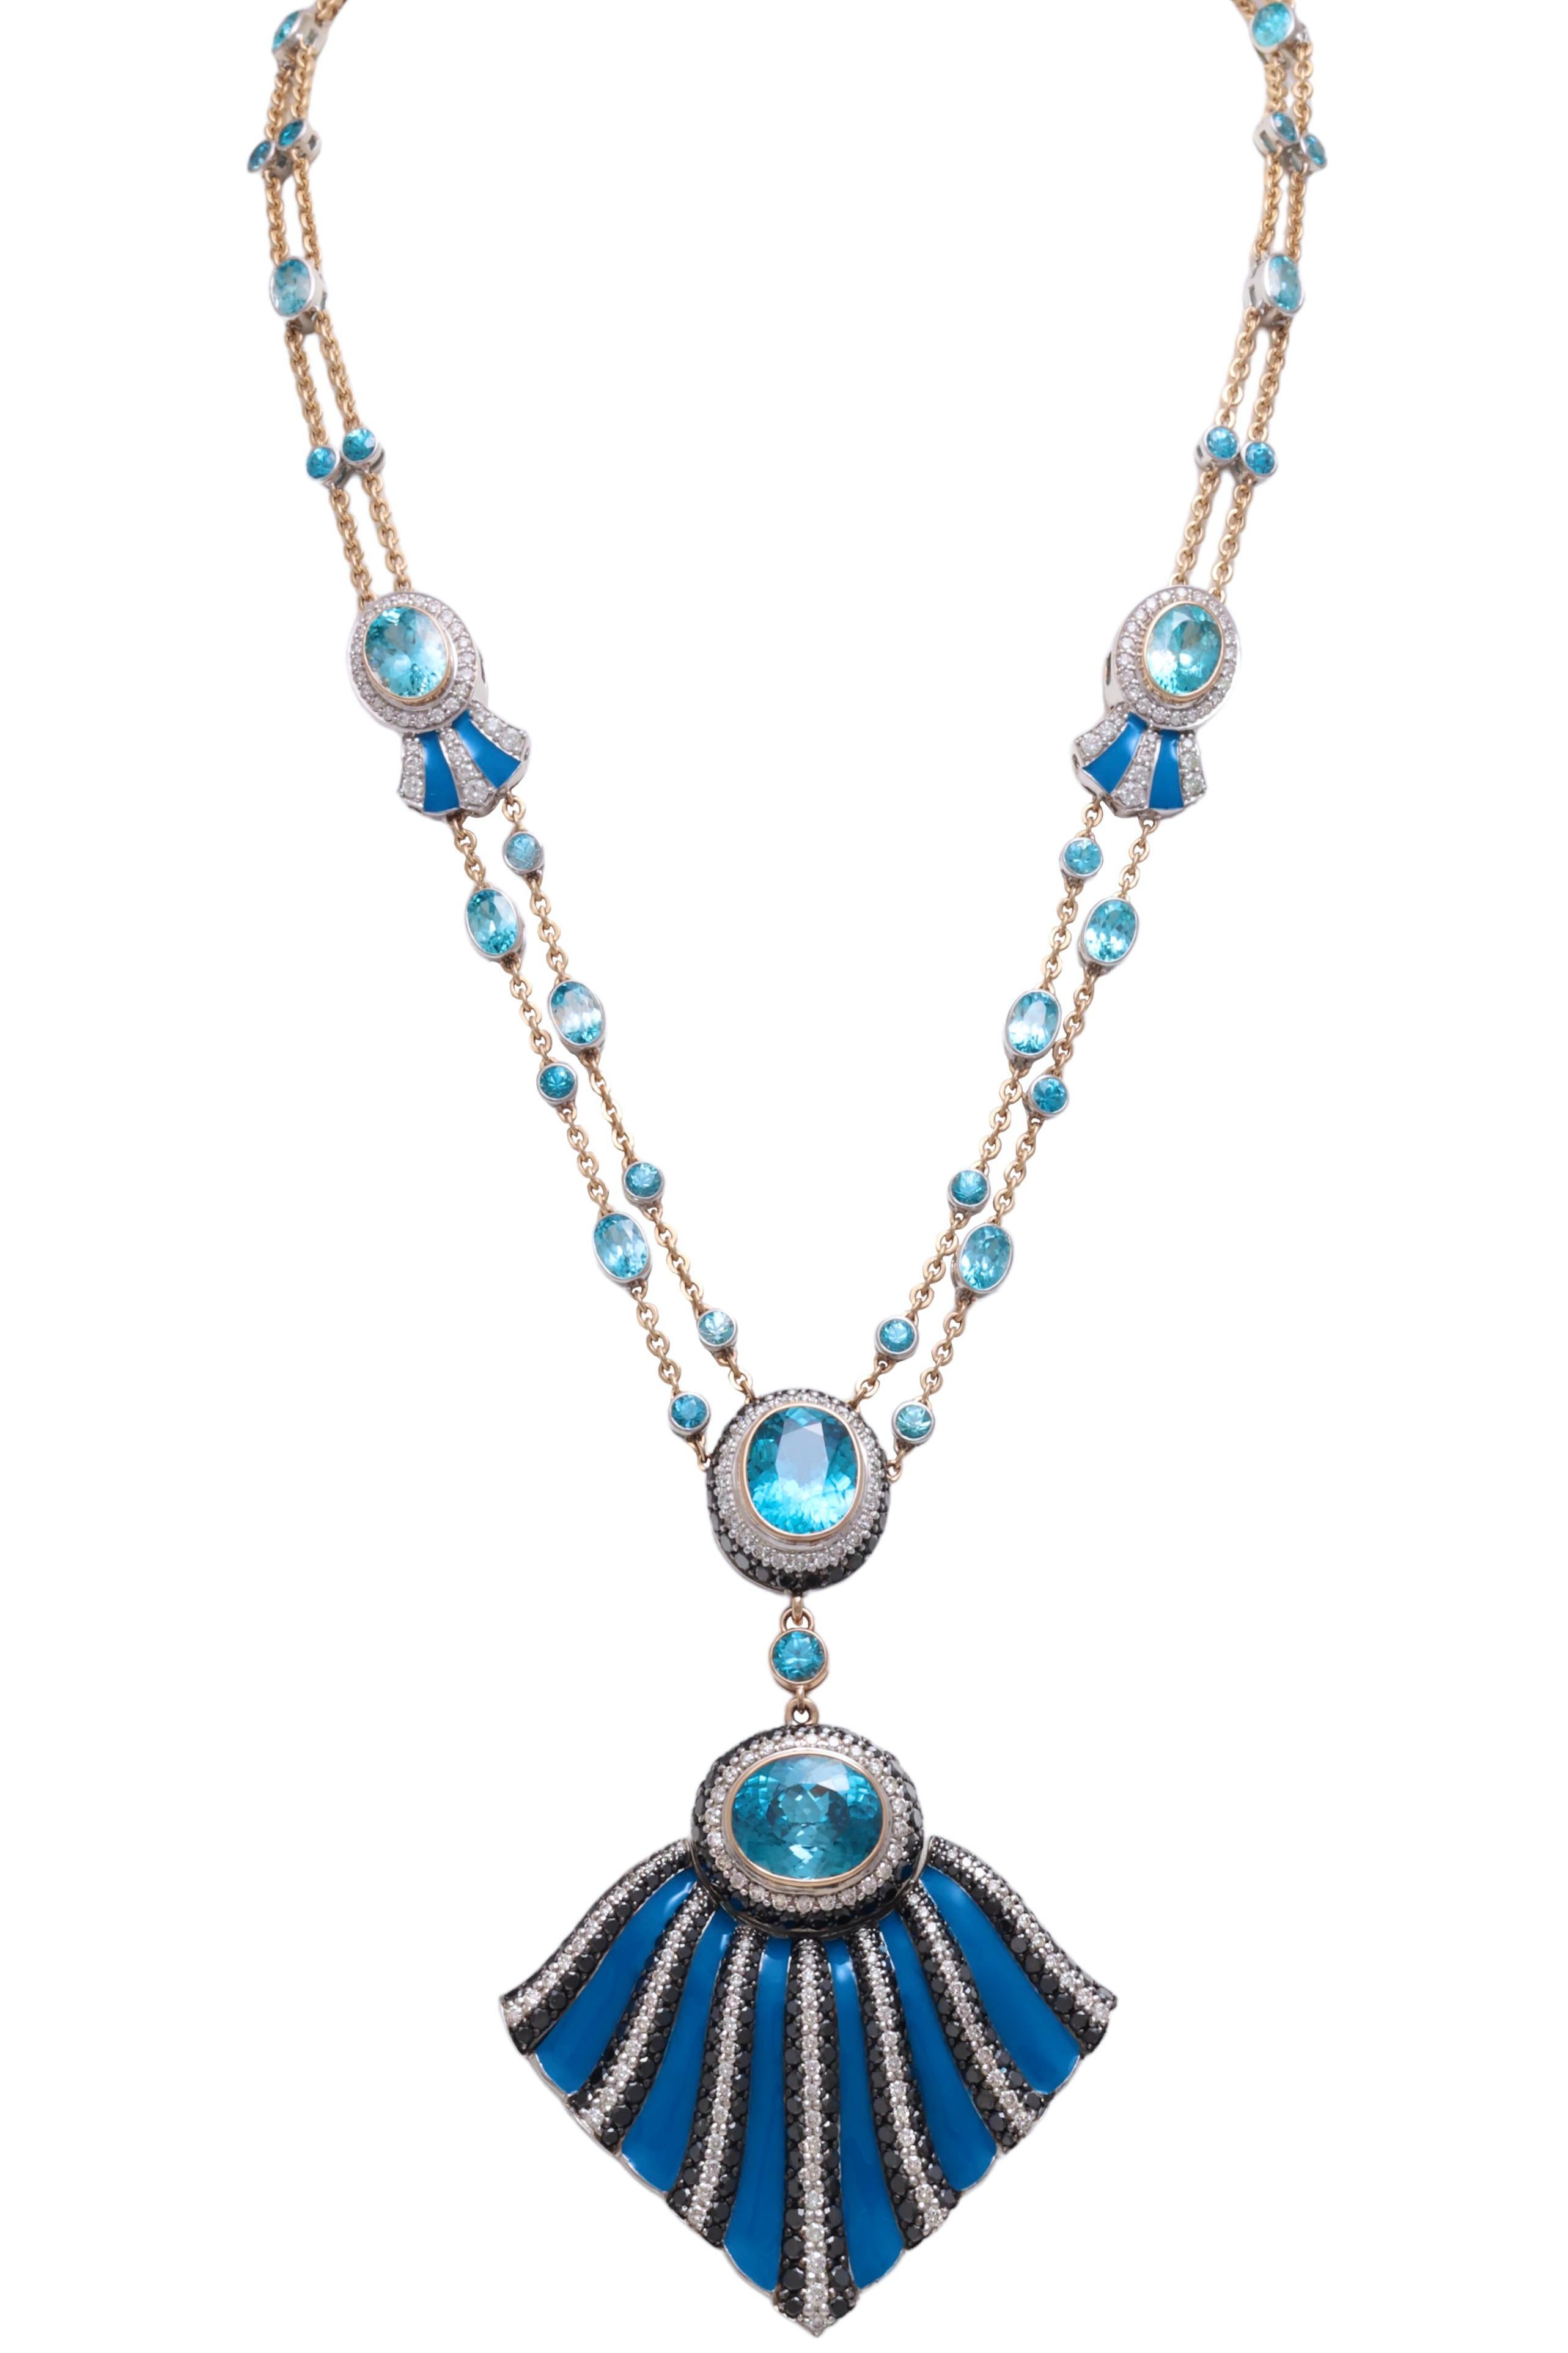 Zorab Creation 18 kt. Gold Necklace Handcrafted With 8 ct. Black / White Diamonds, 37 ct. Blue Topaz Gemstones,  Blue enamel 

One of a kind completely handcrafted piece of art !

Topaz: blue topaz gemstone together 37 ct.

White diamonds: White